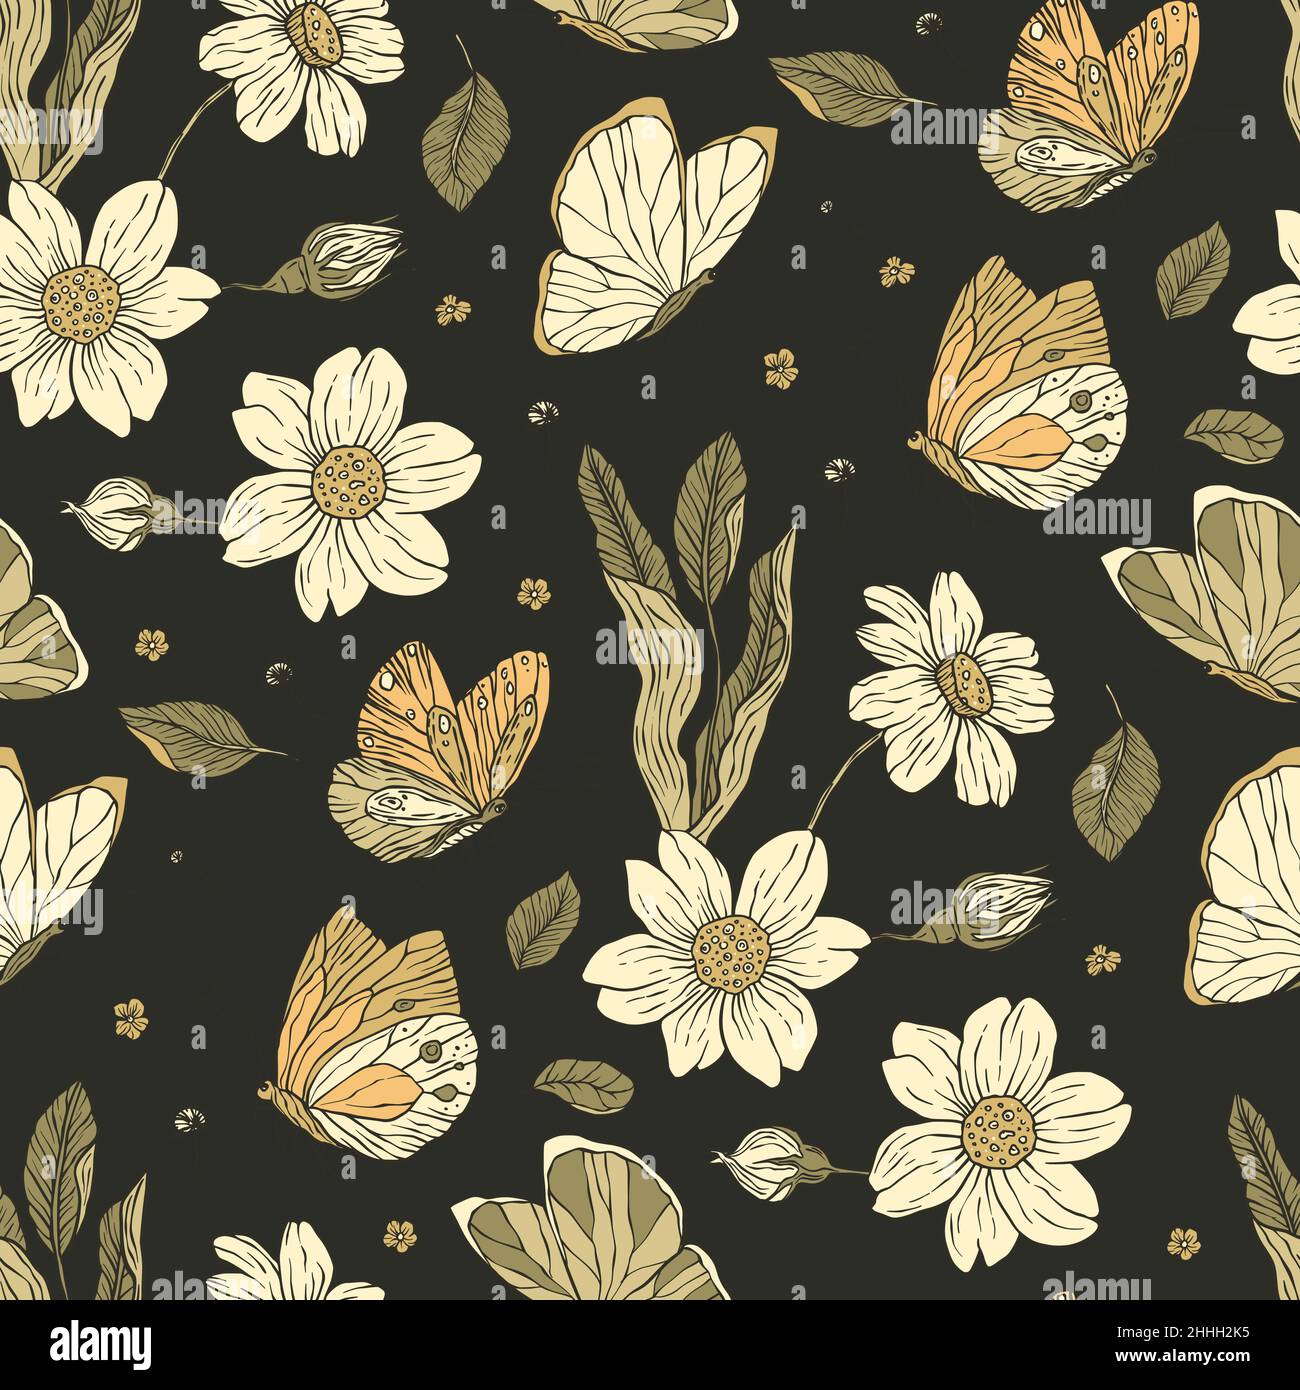 Vintage daisy and butterfly floral boho seamless pattern. Ornate garden art Stock Vector